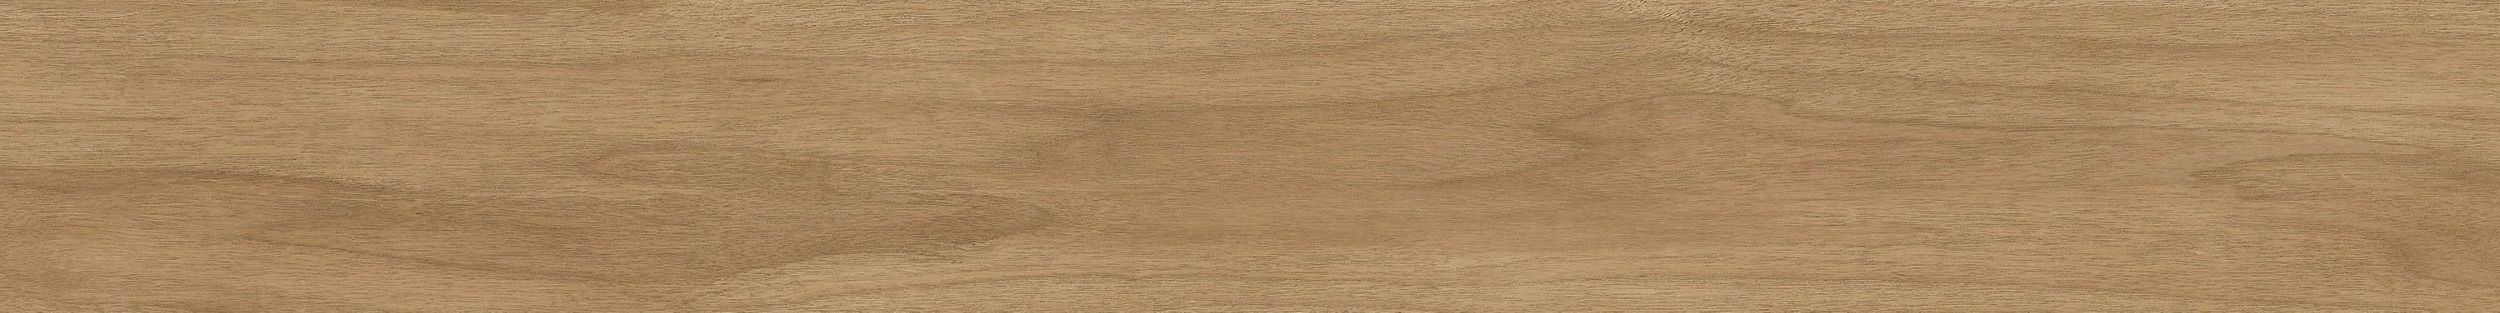 Criterion Classic Woodgrains LVT In Washed Maple image number 2